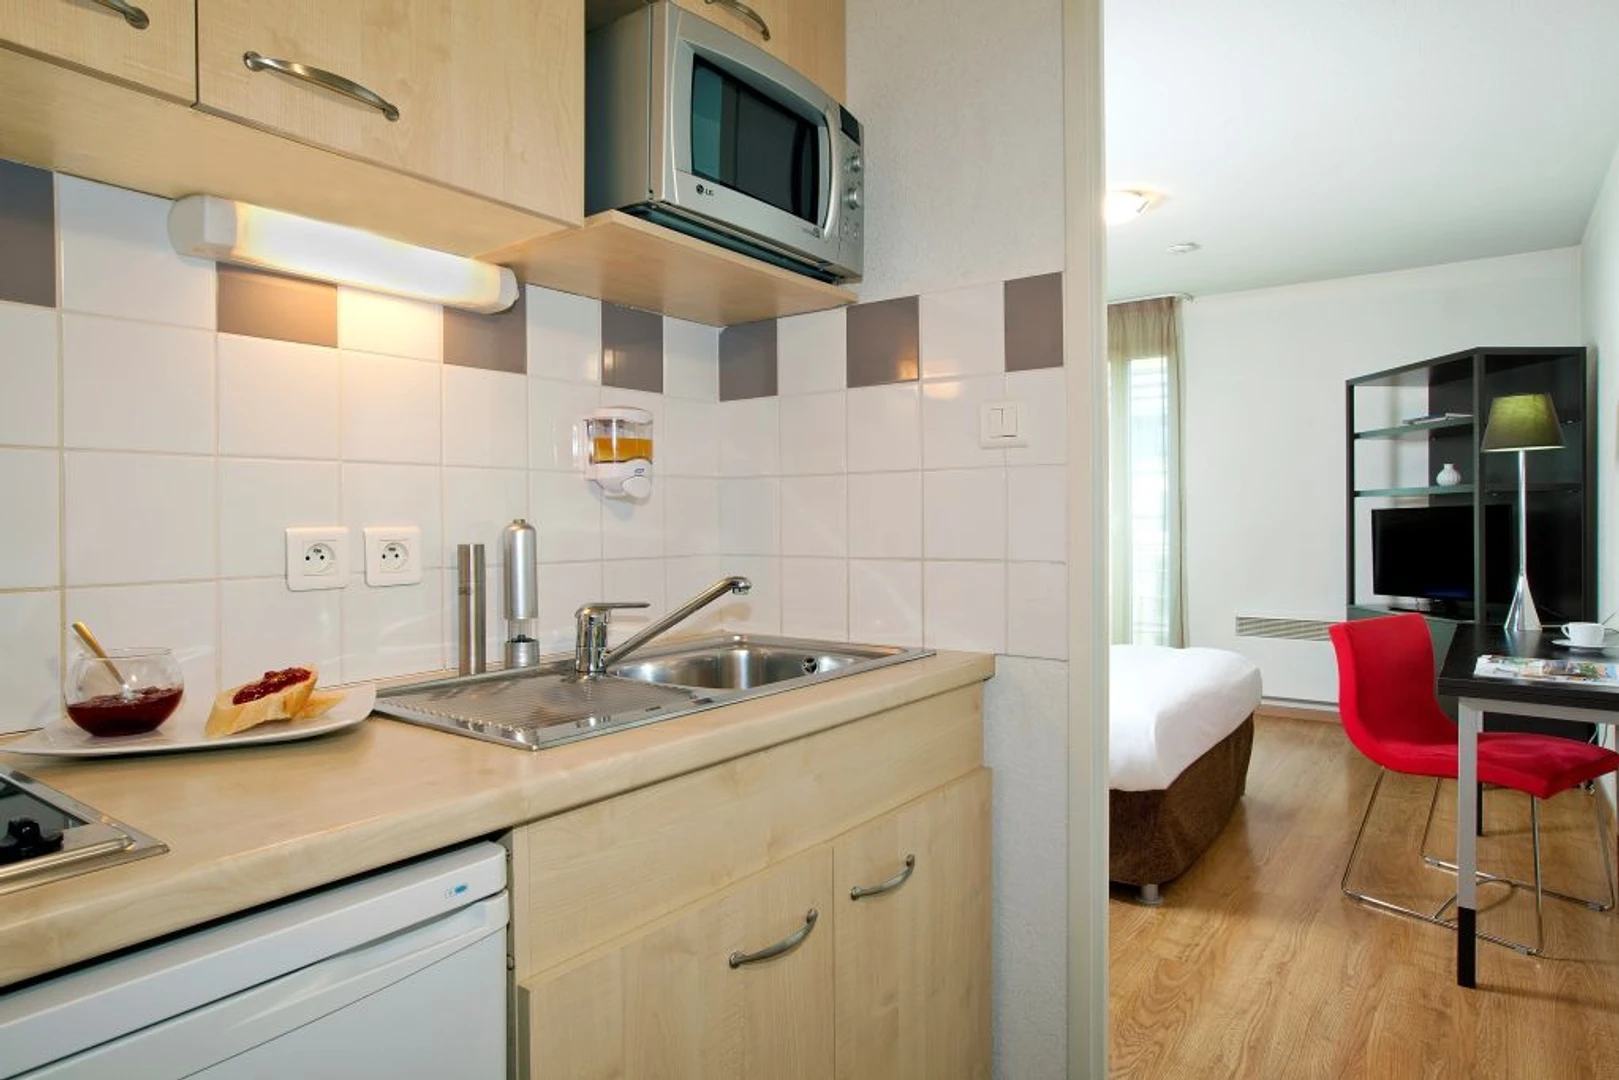 Accommodation in the centre of Metz